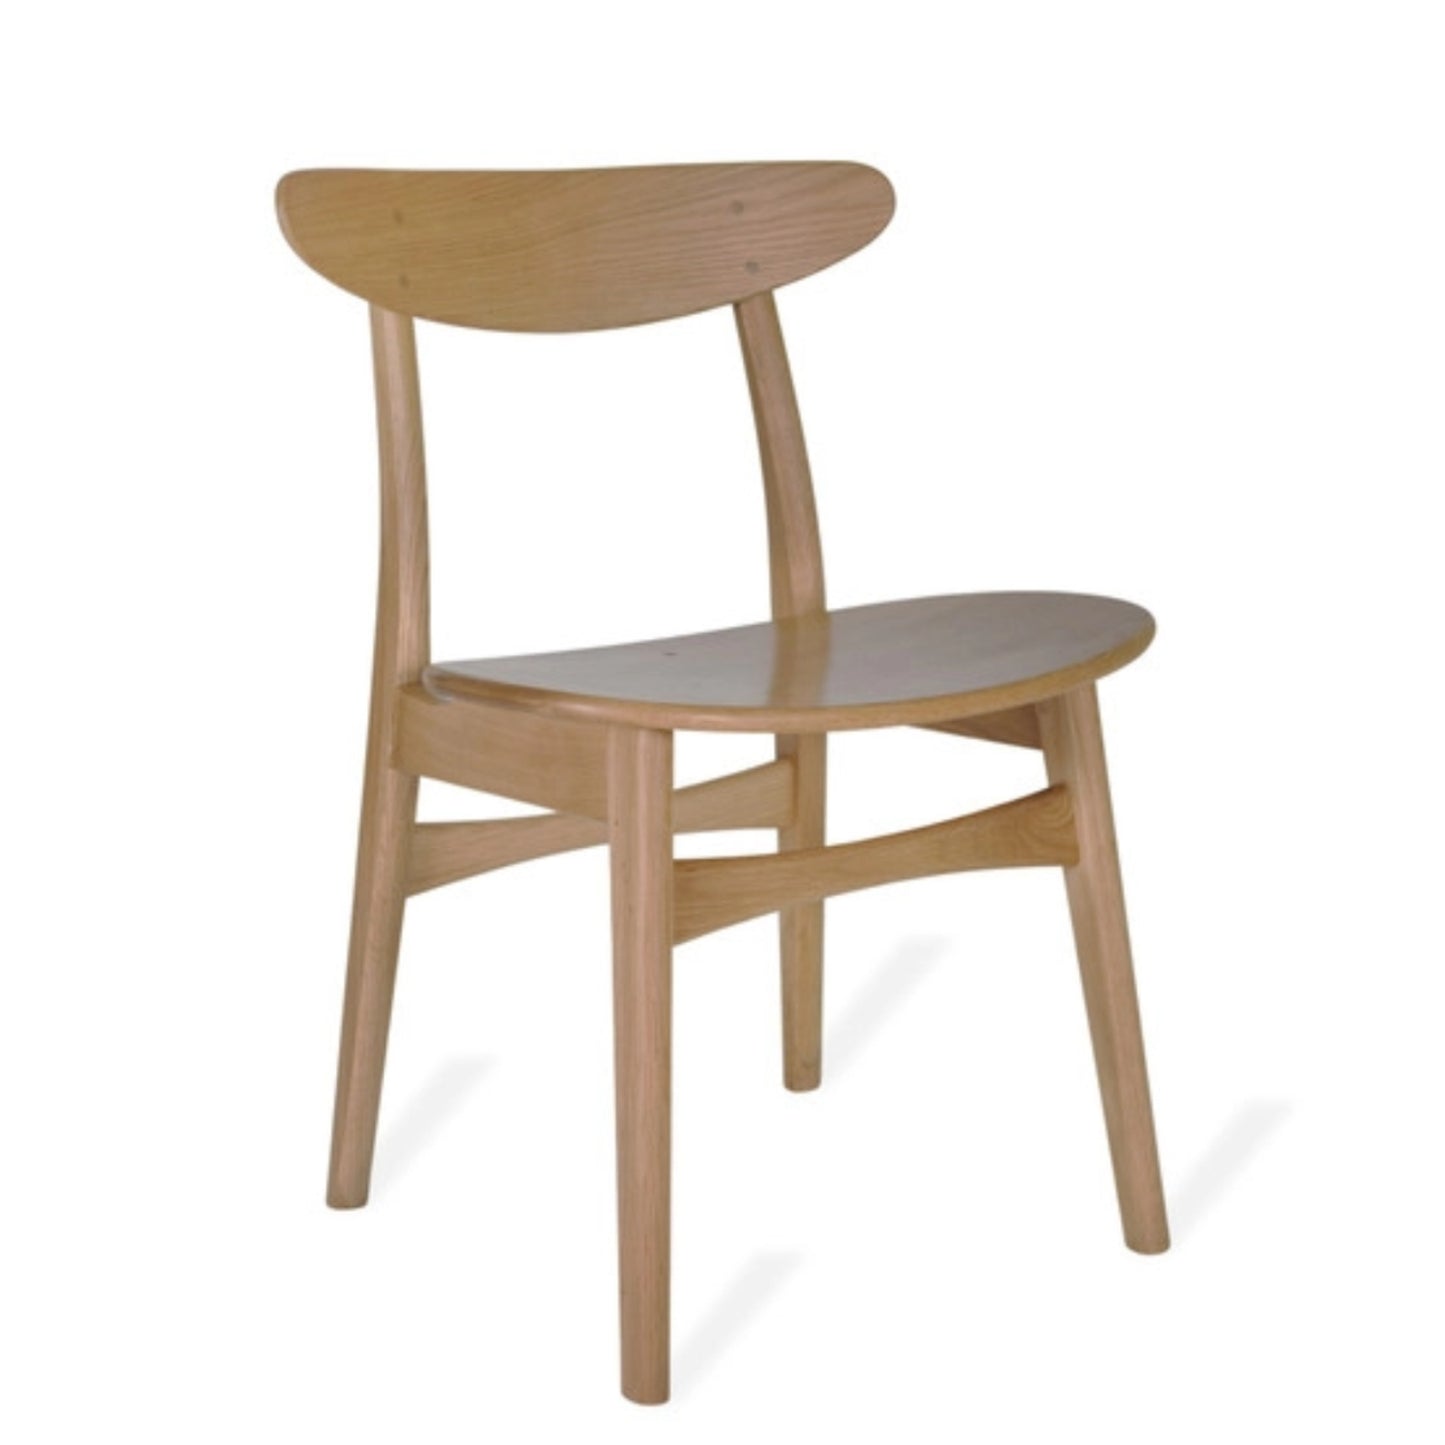 Pair of Longcot Dining Chairs by Garden Trading - Oak